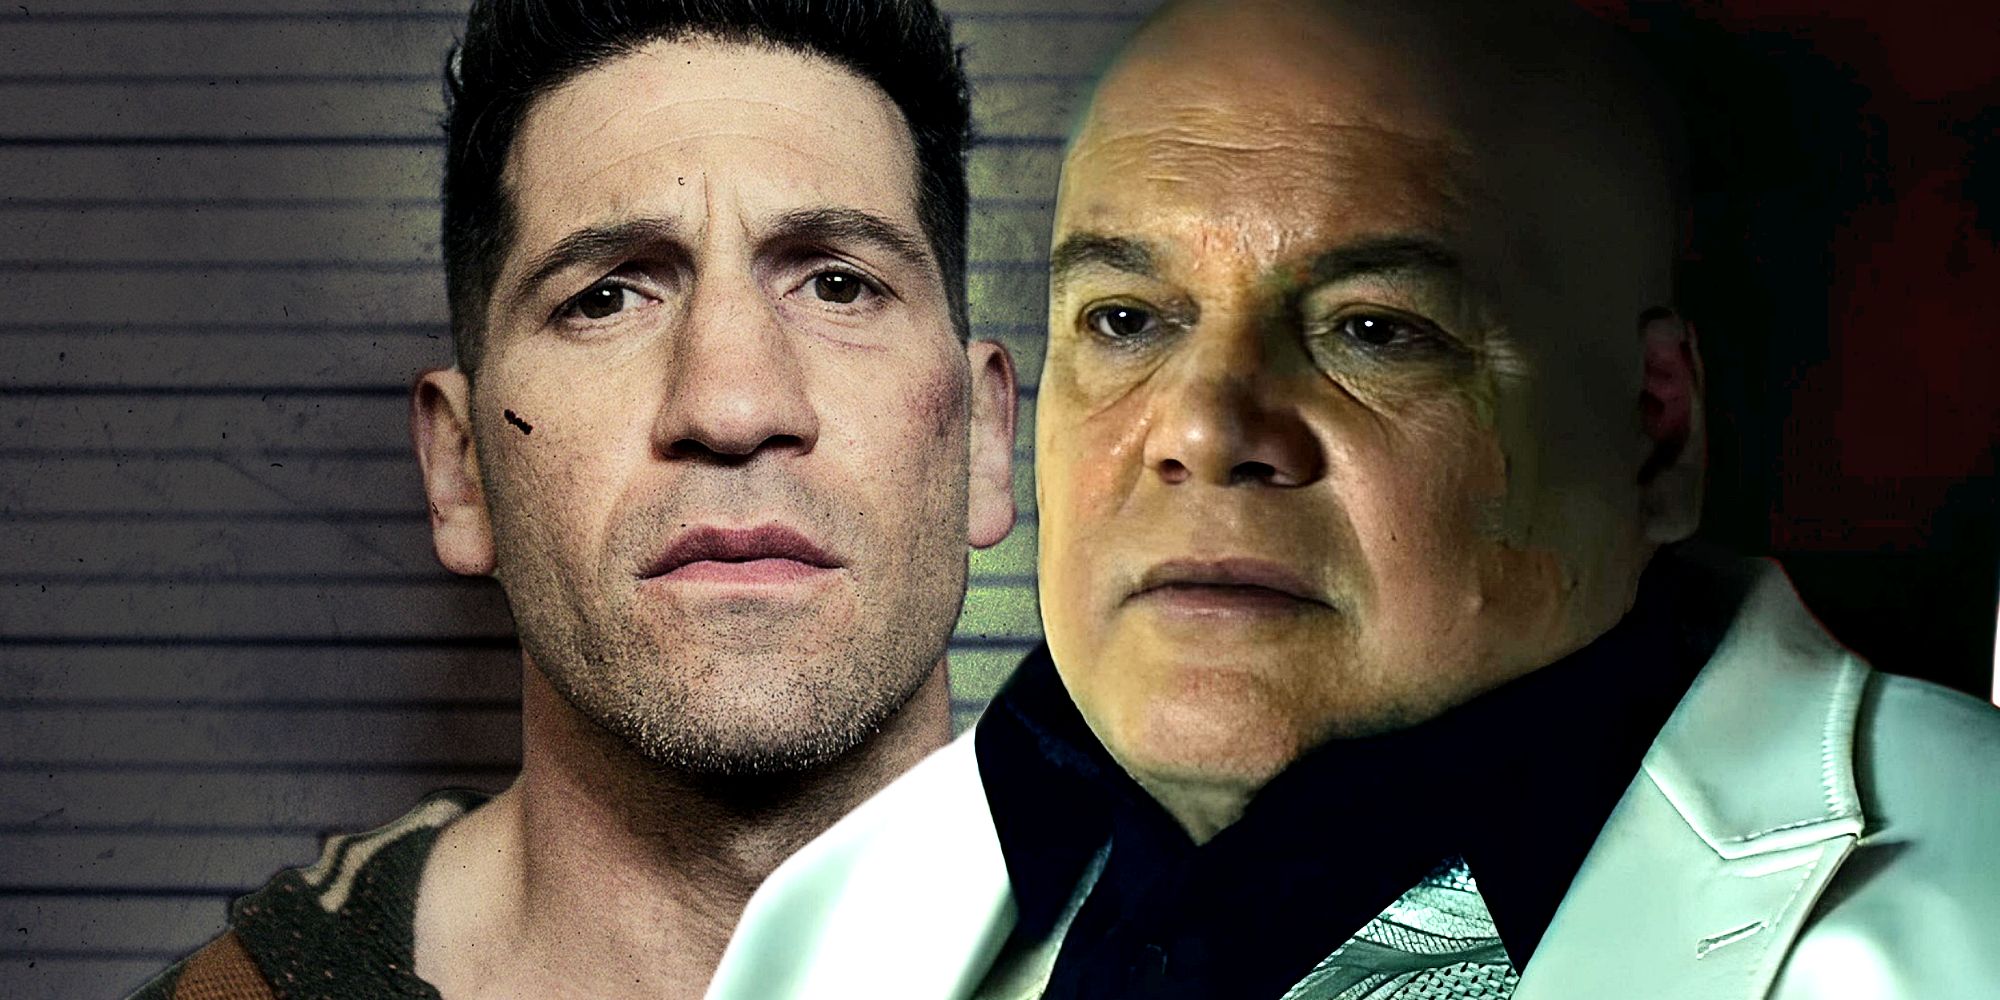 Jon Bernthal's The Punisher and Vincent D'Onofrio's Kingpin